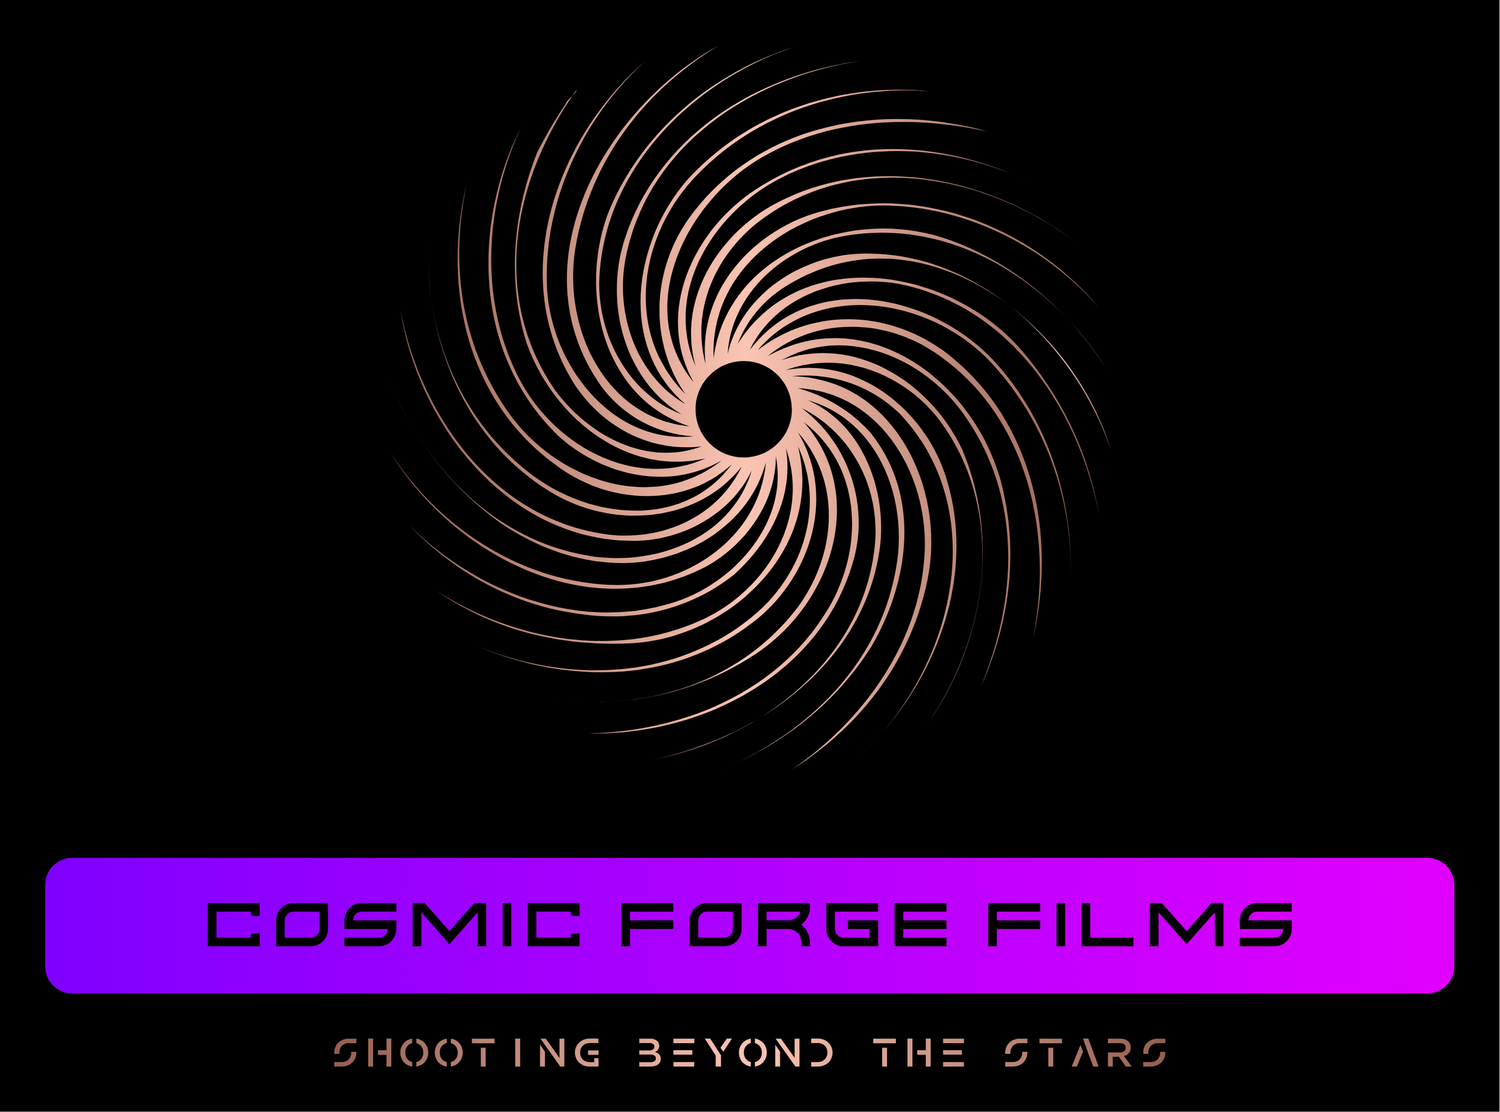 Cosmic Forge Films